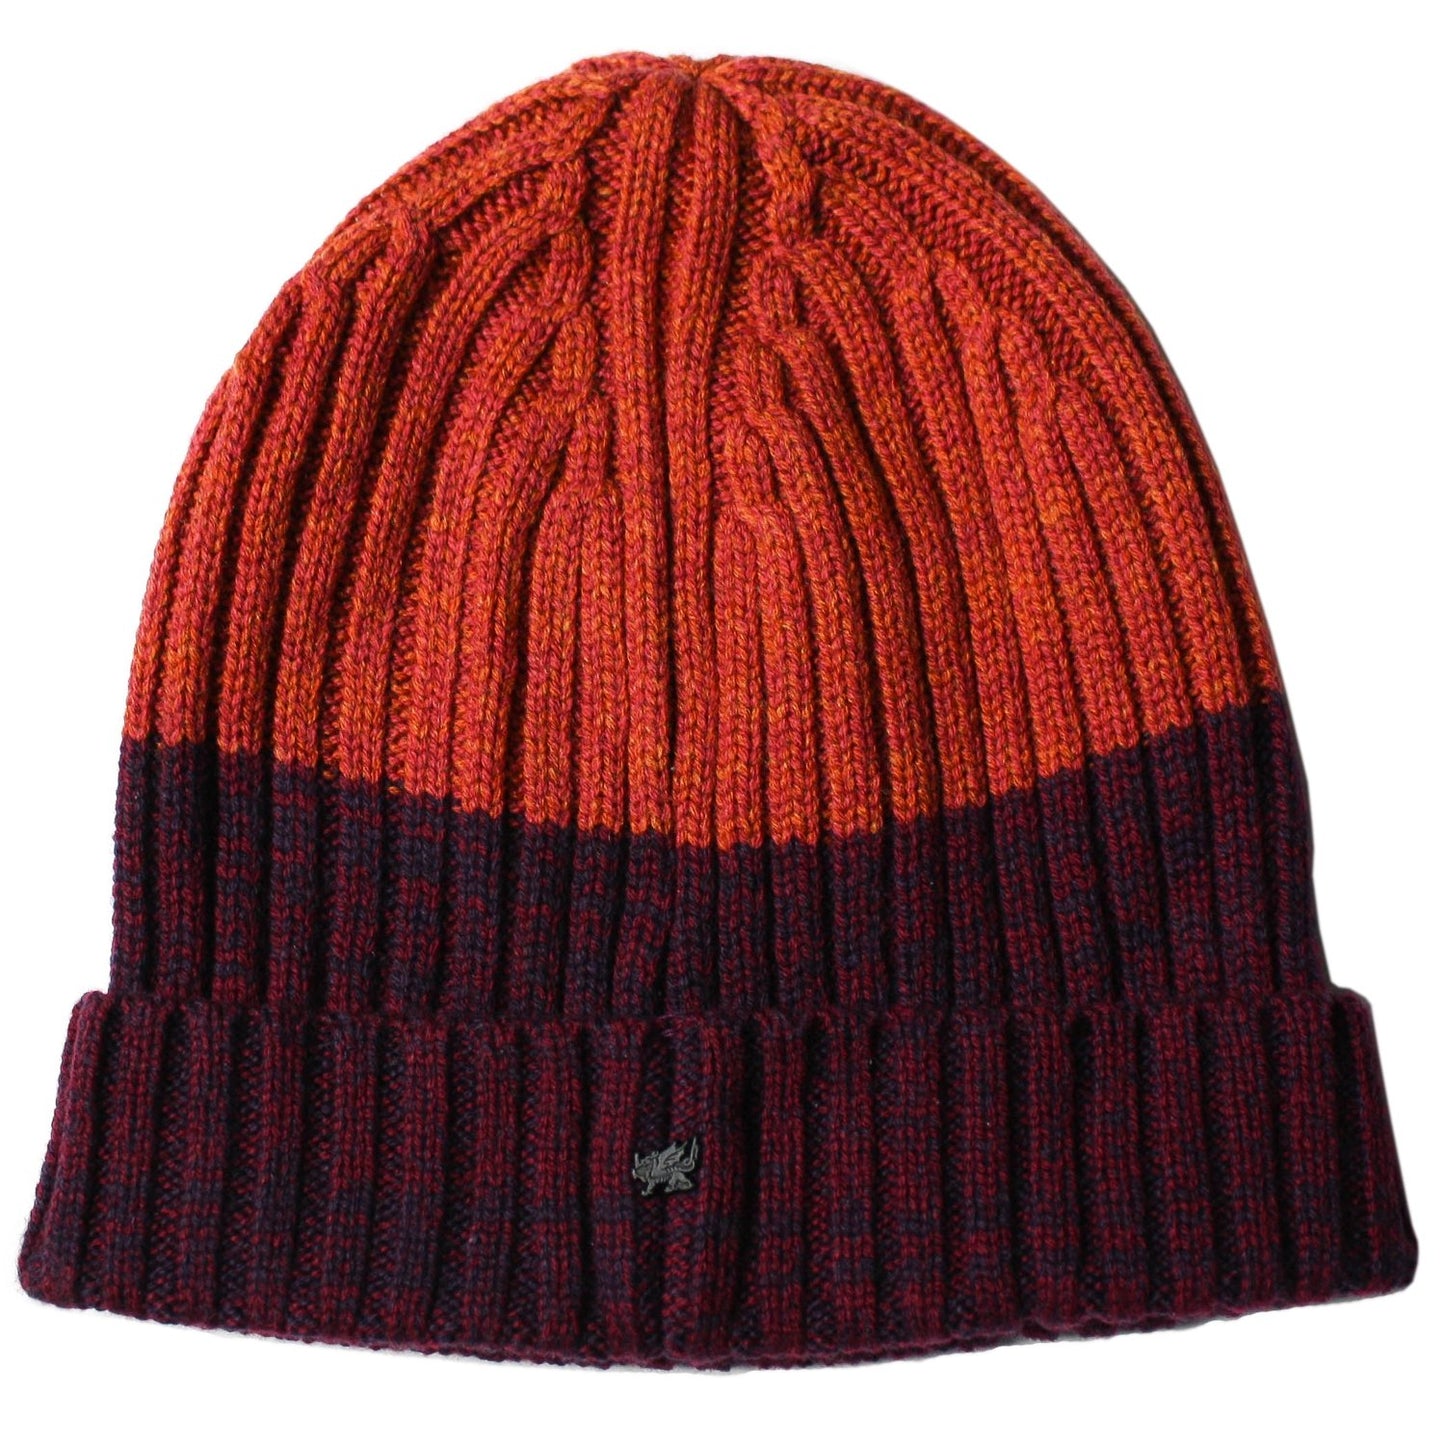 Benny Beanie in Burgundy/Rust - Lords Of Harlech